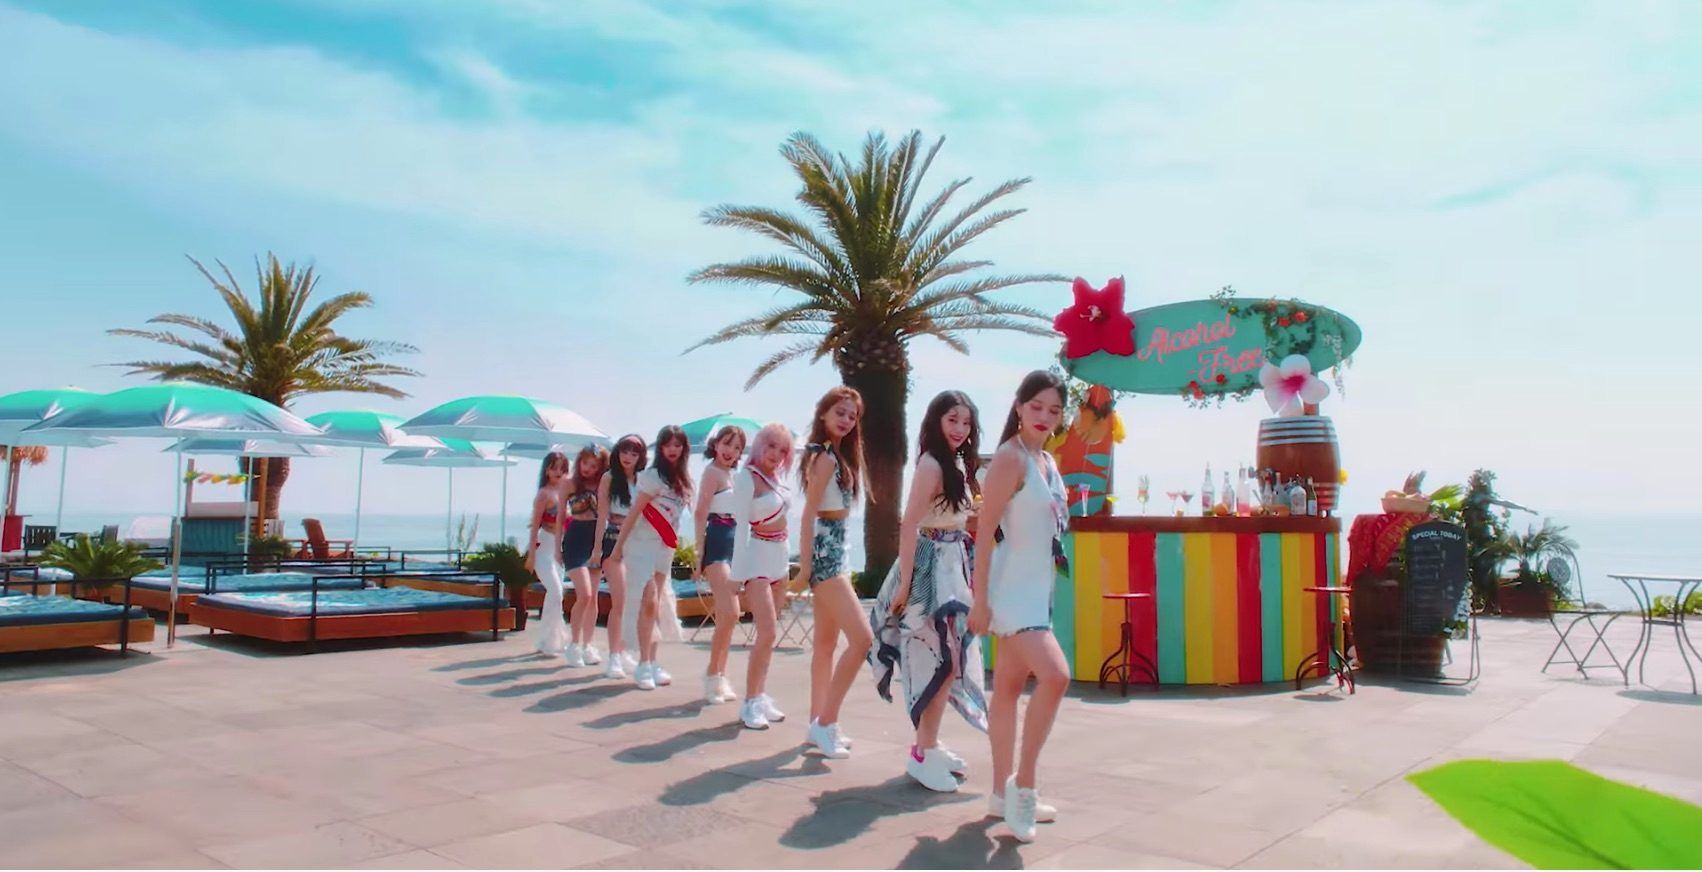 WATCH: Summer isn’t over yet in TWICE’s ‘Alcohol-Free’ music video